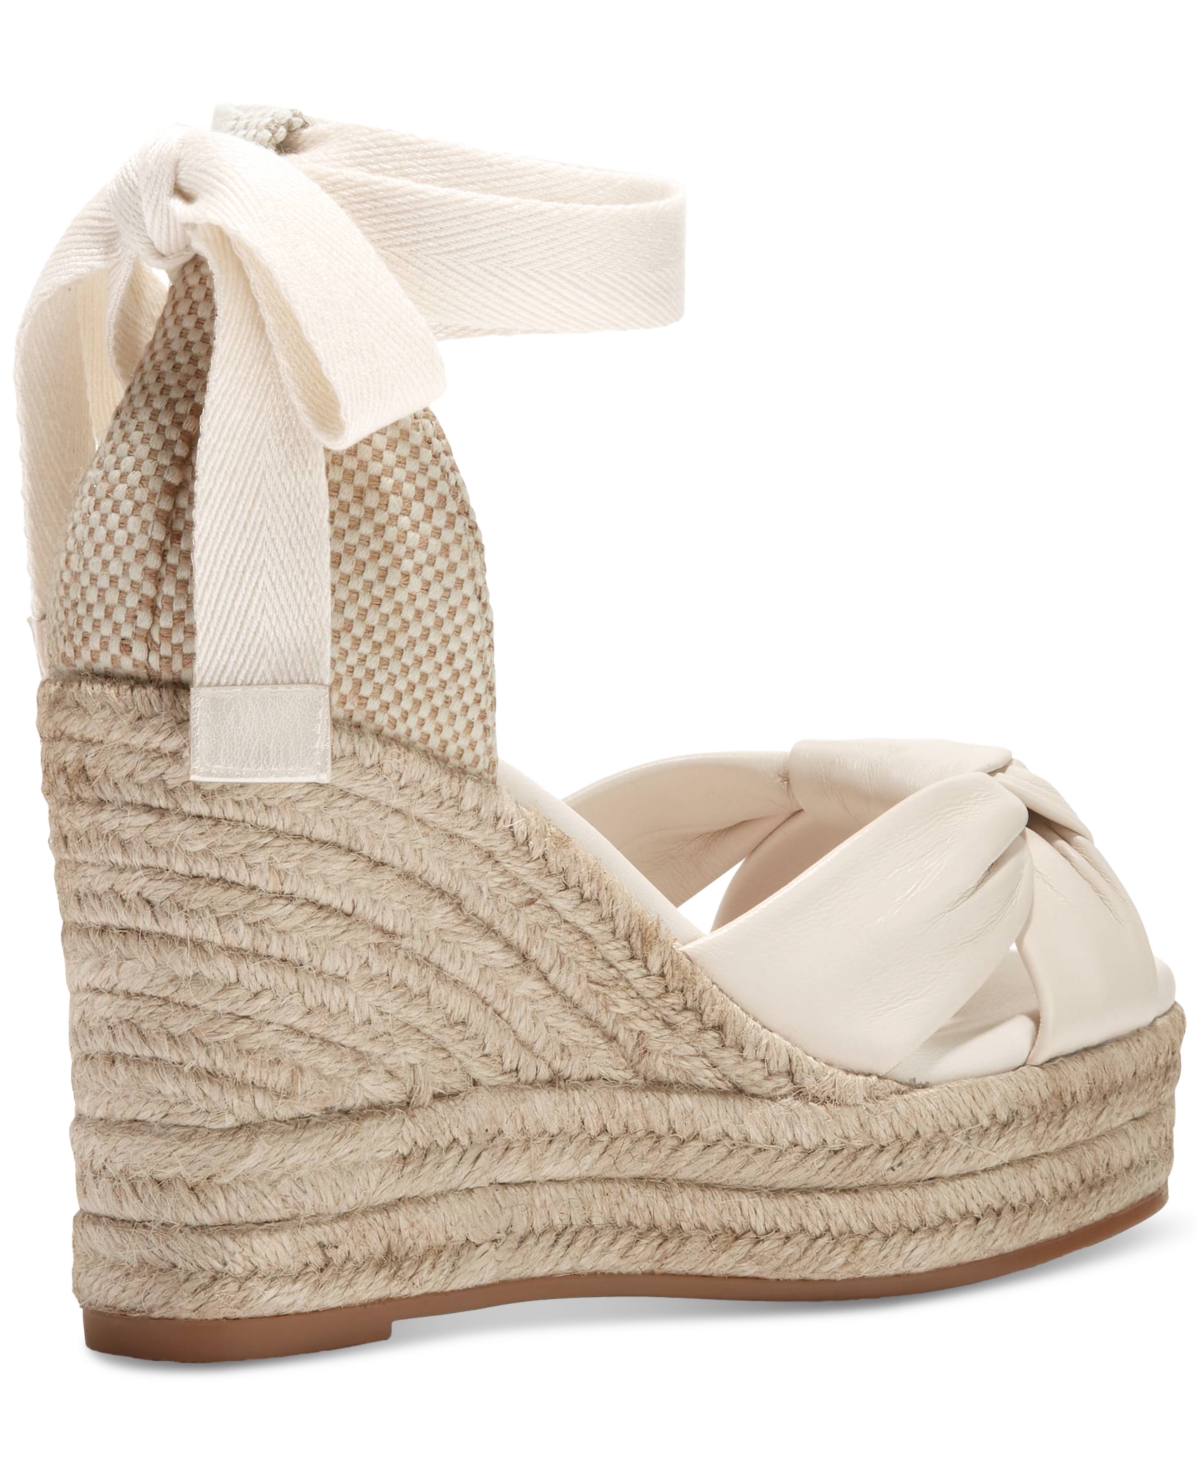 Shop Cole Haan Women's Cloudfeel Hampton Espadrille Wedge Sandals In Ivory Leather,natural Canavs